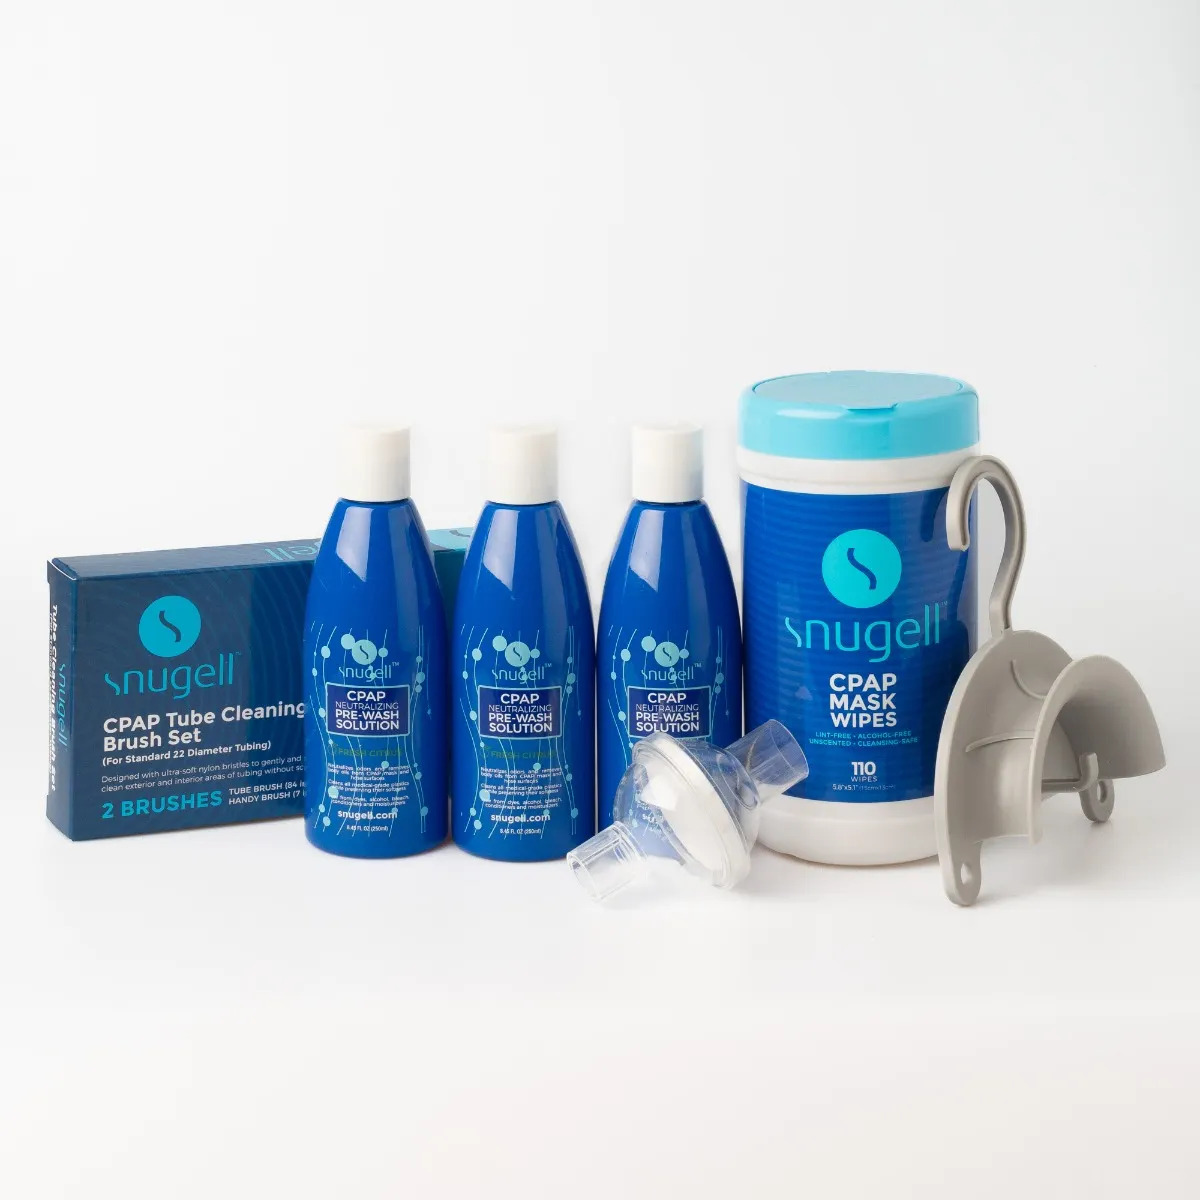 Photo of our black friday cleaning bundle for CPAP!